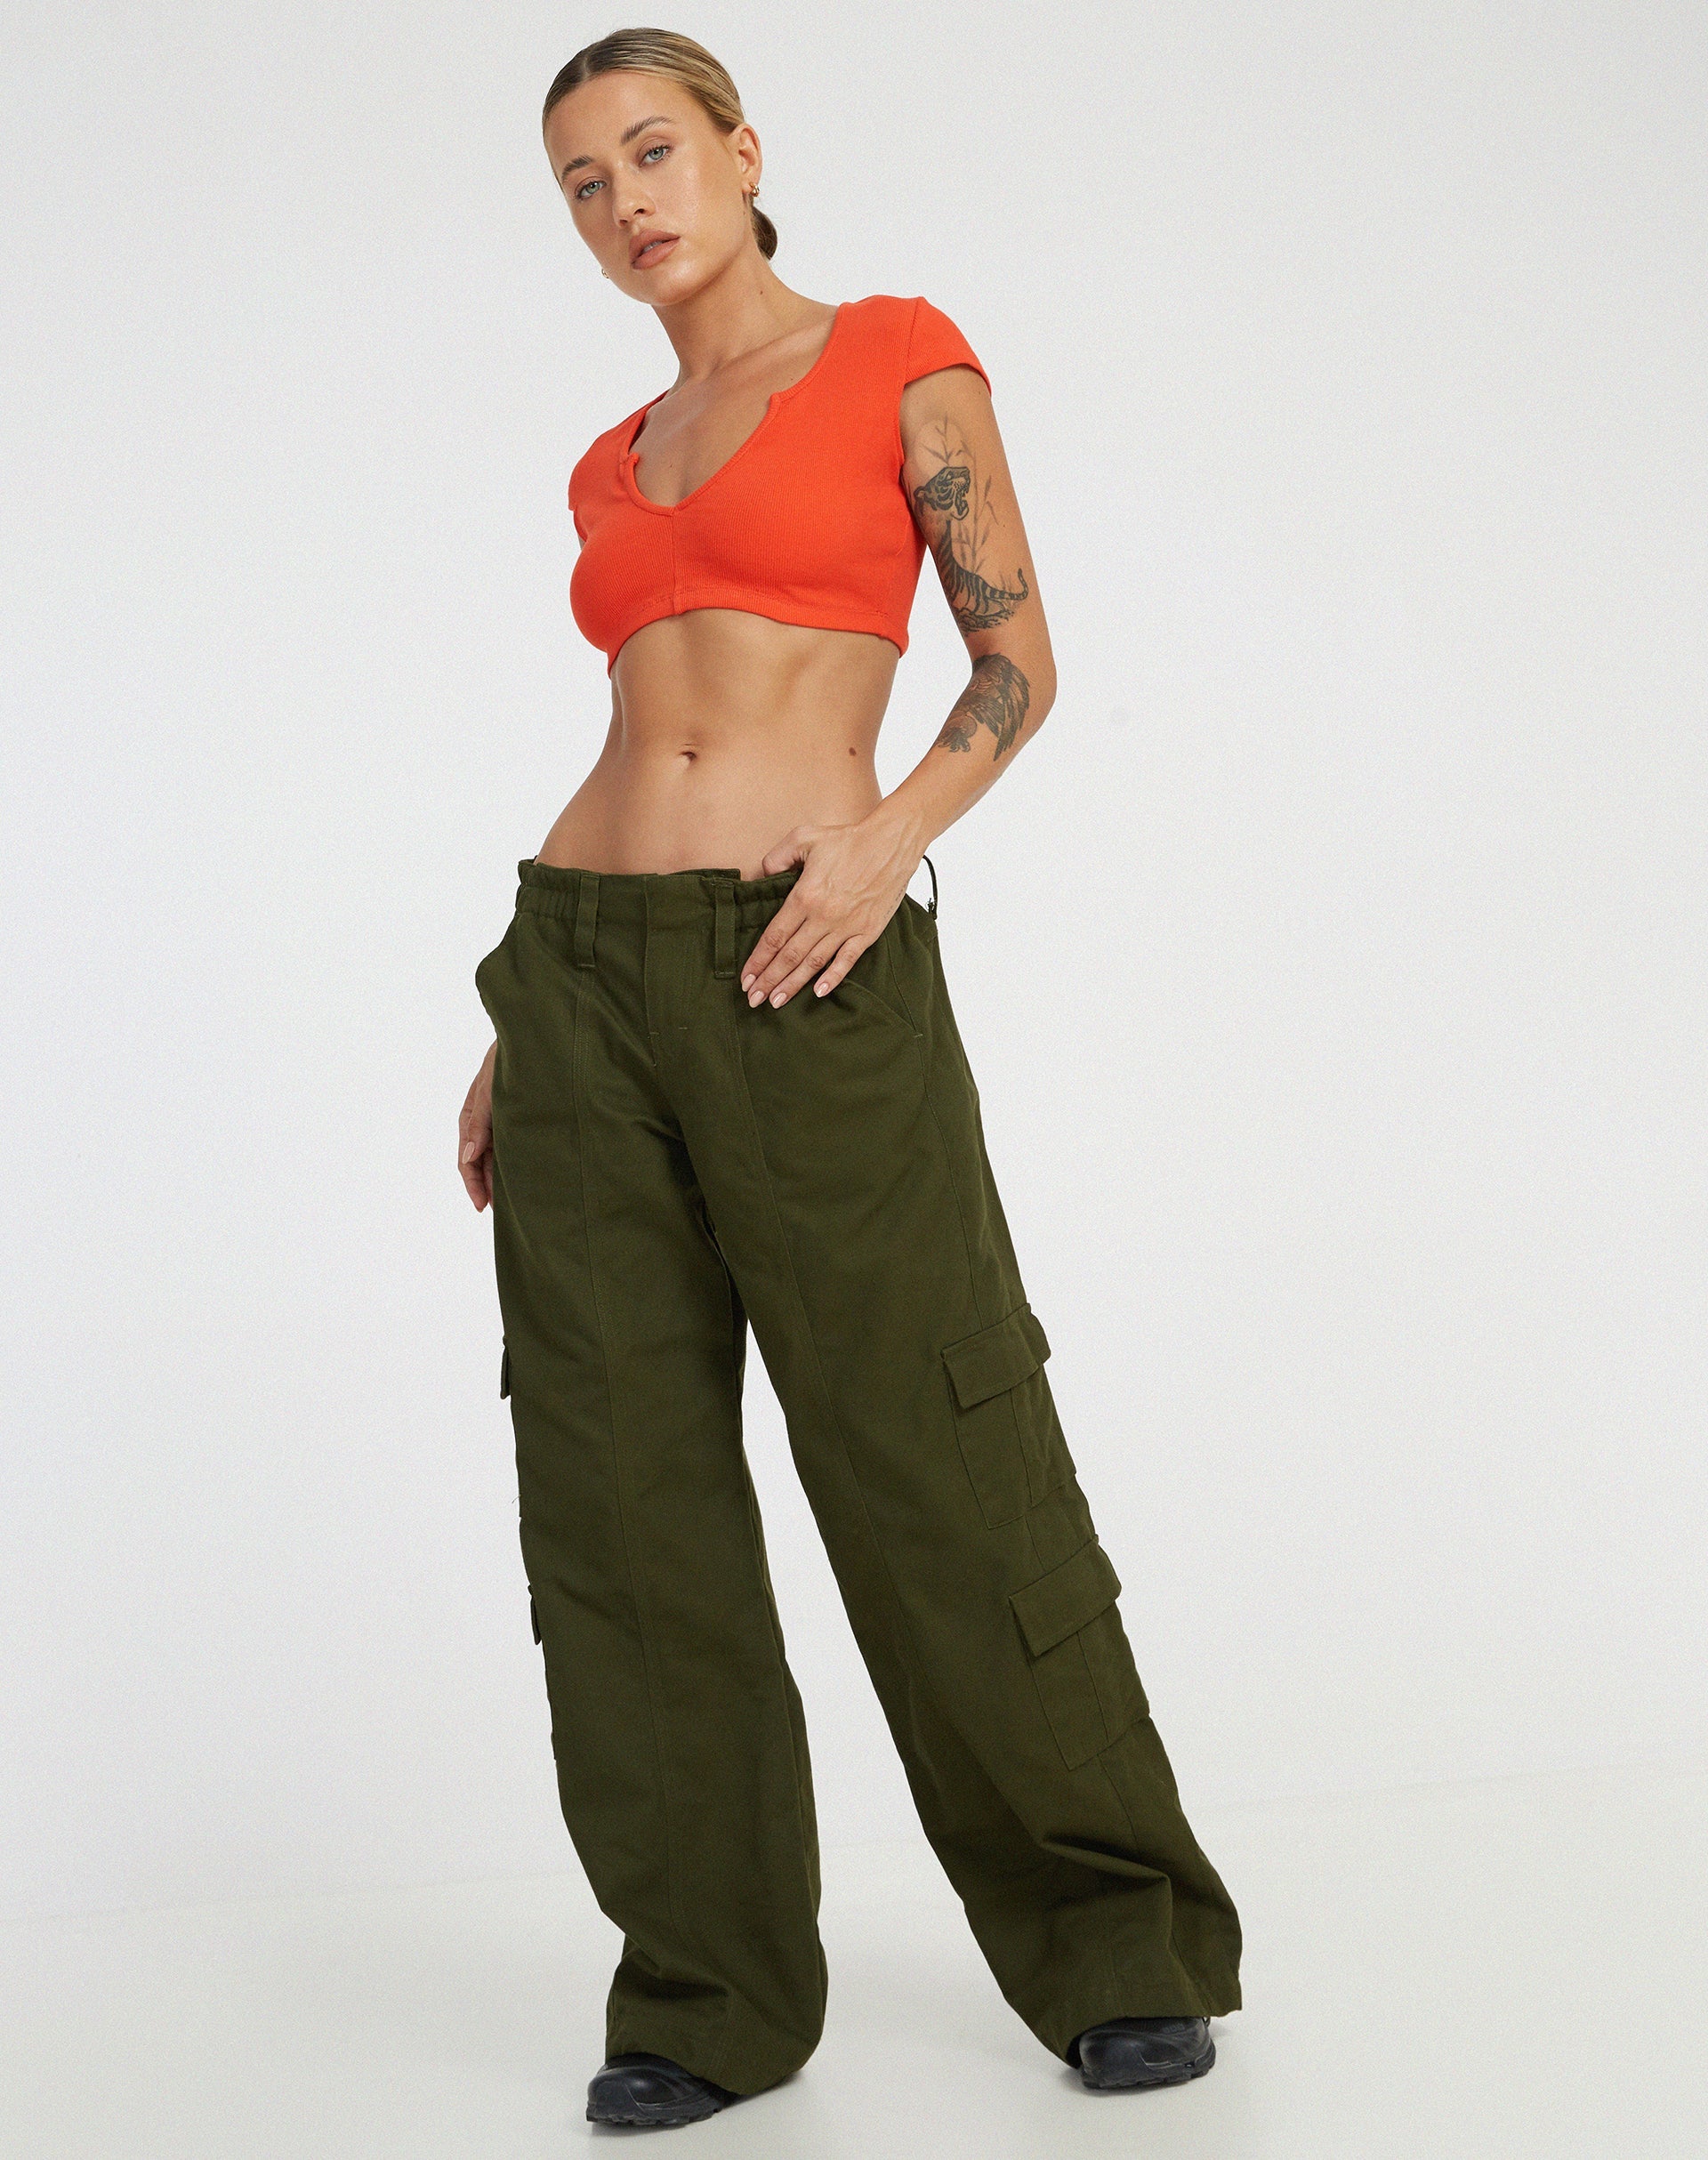 image of Guanna Crop Top in Red